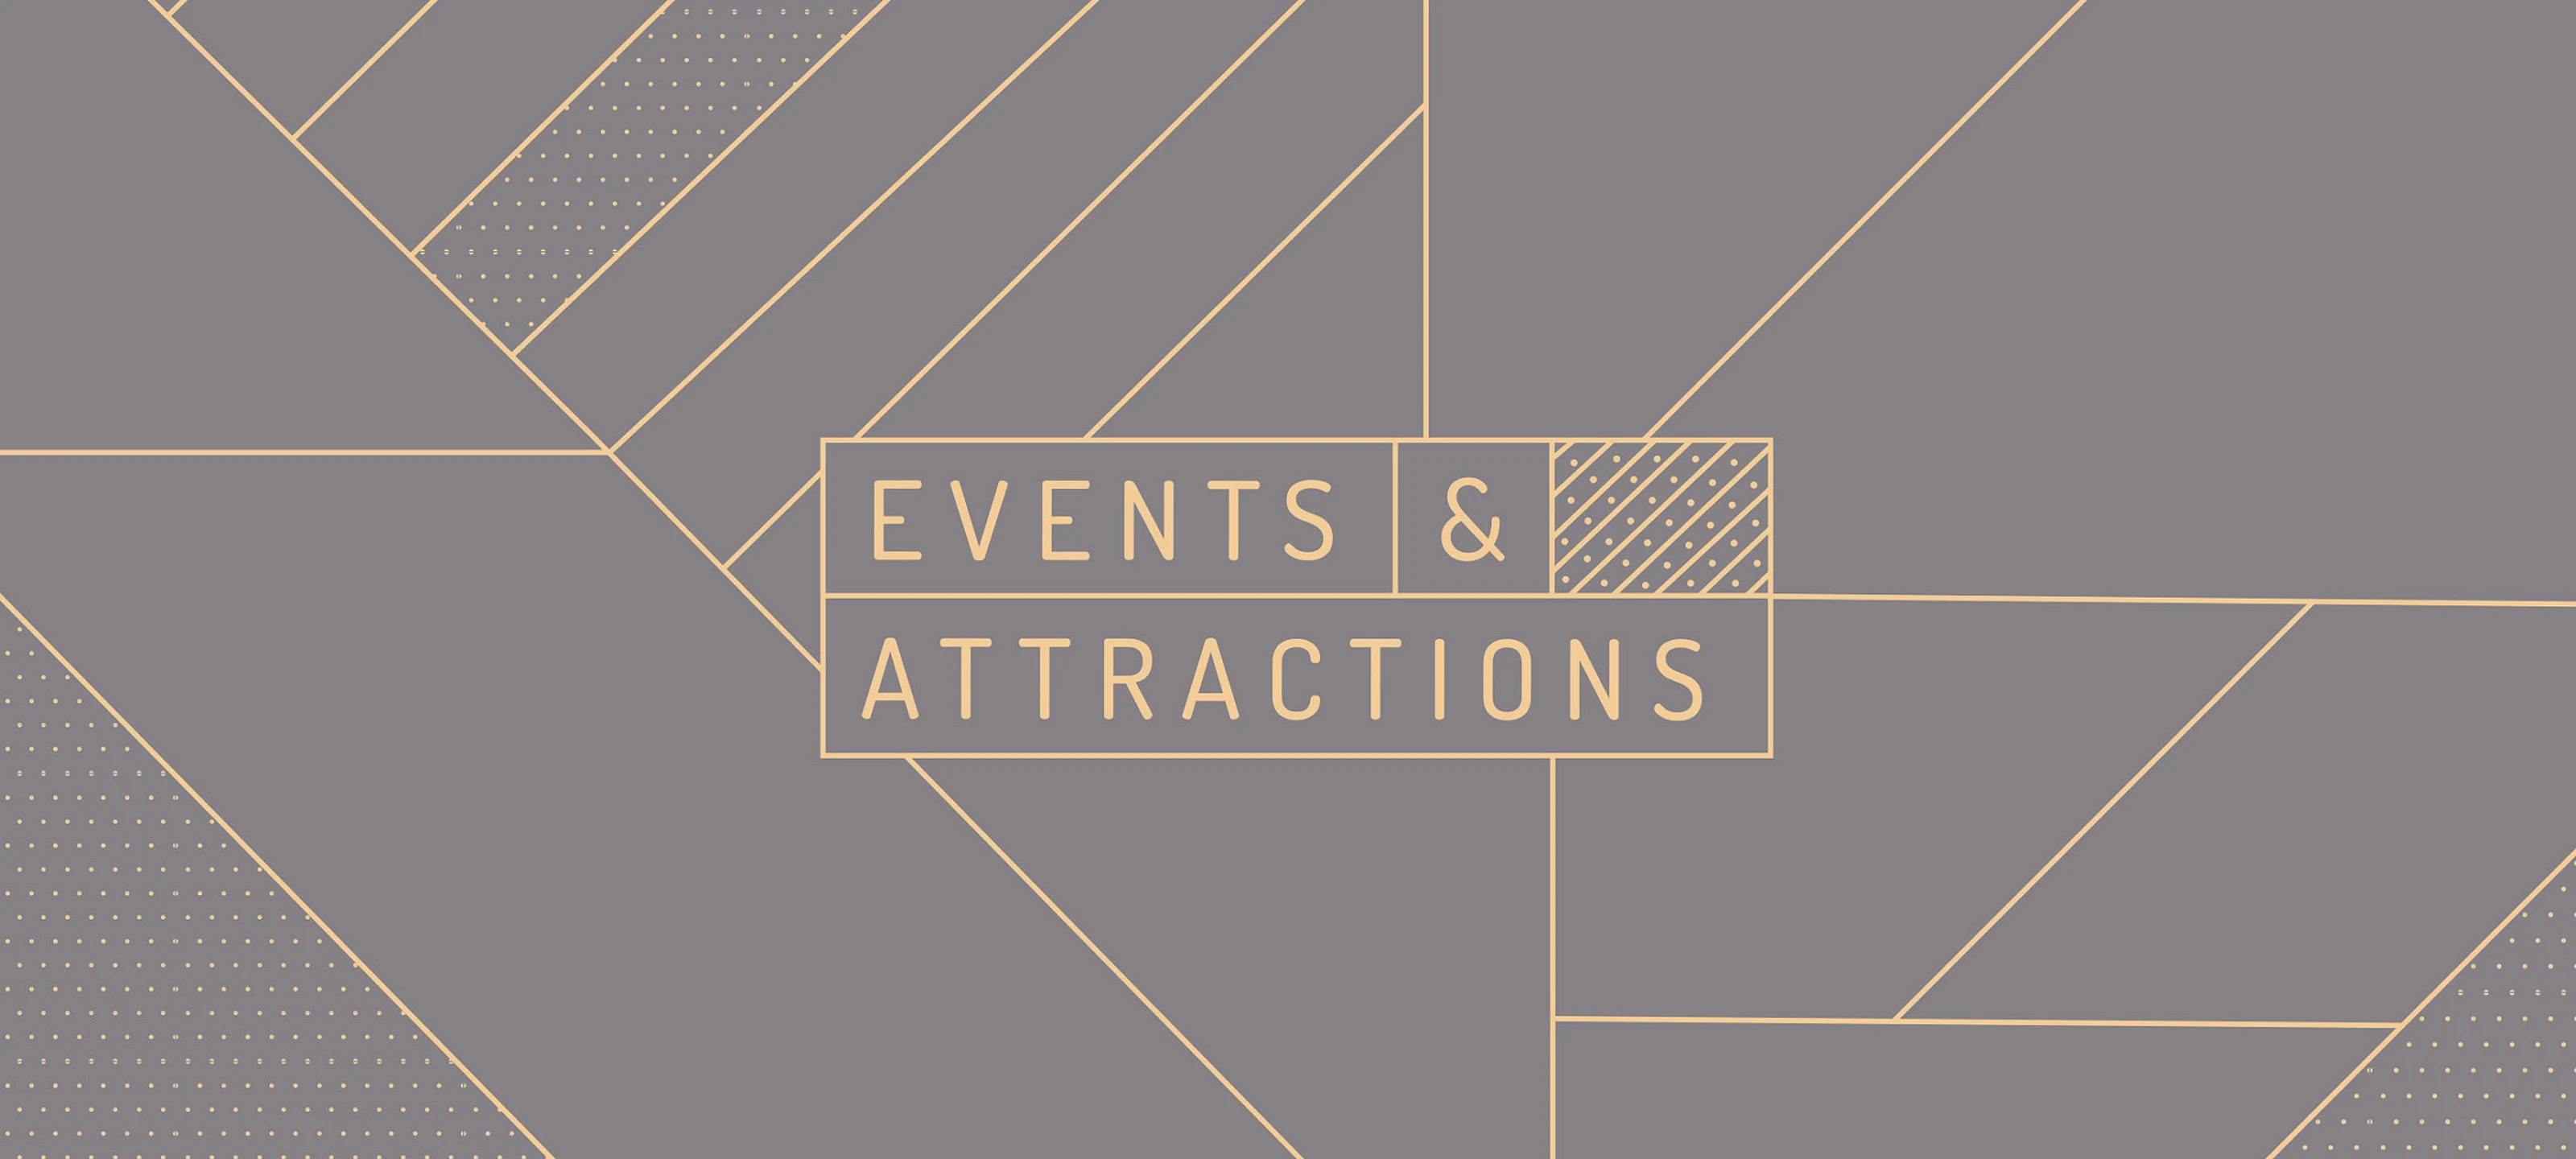 Events and Attractions brandmark